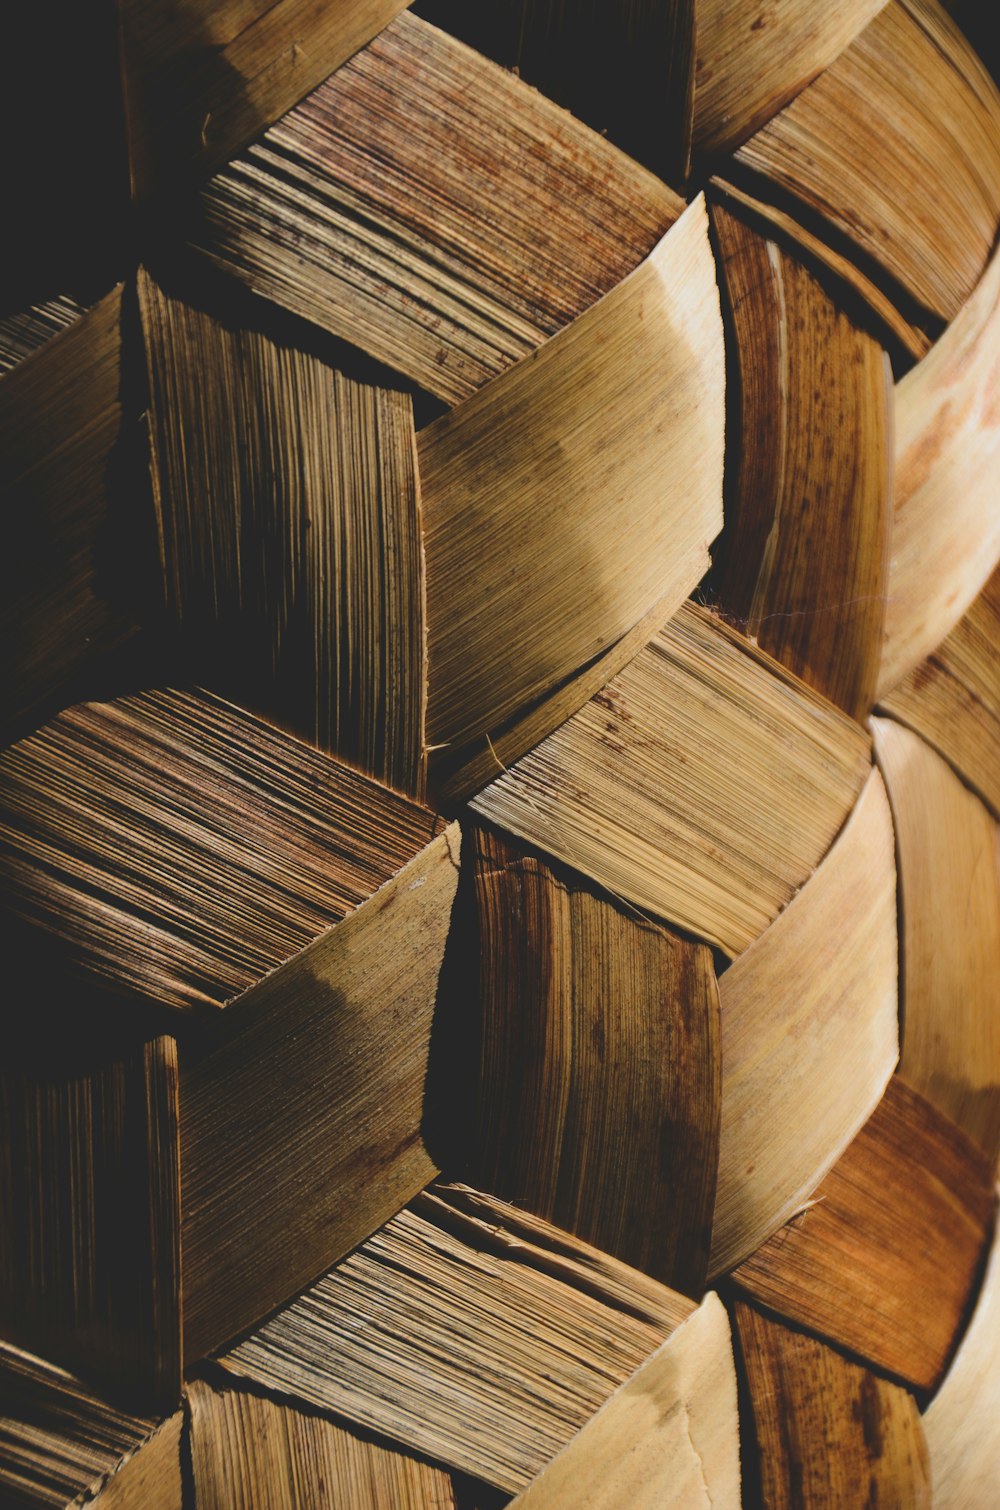 brown wooden blocks in close up photography